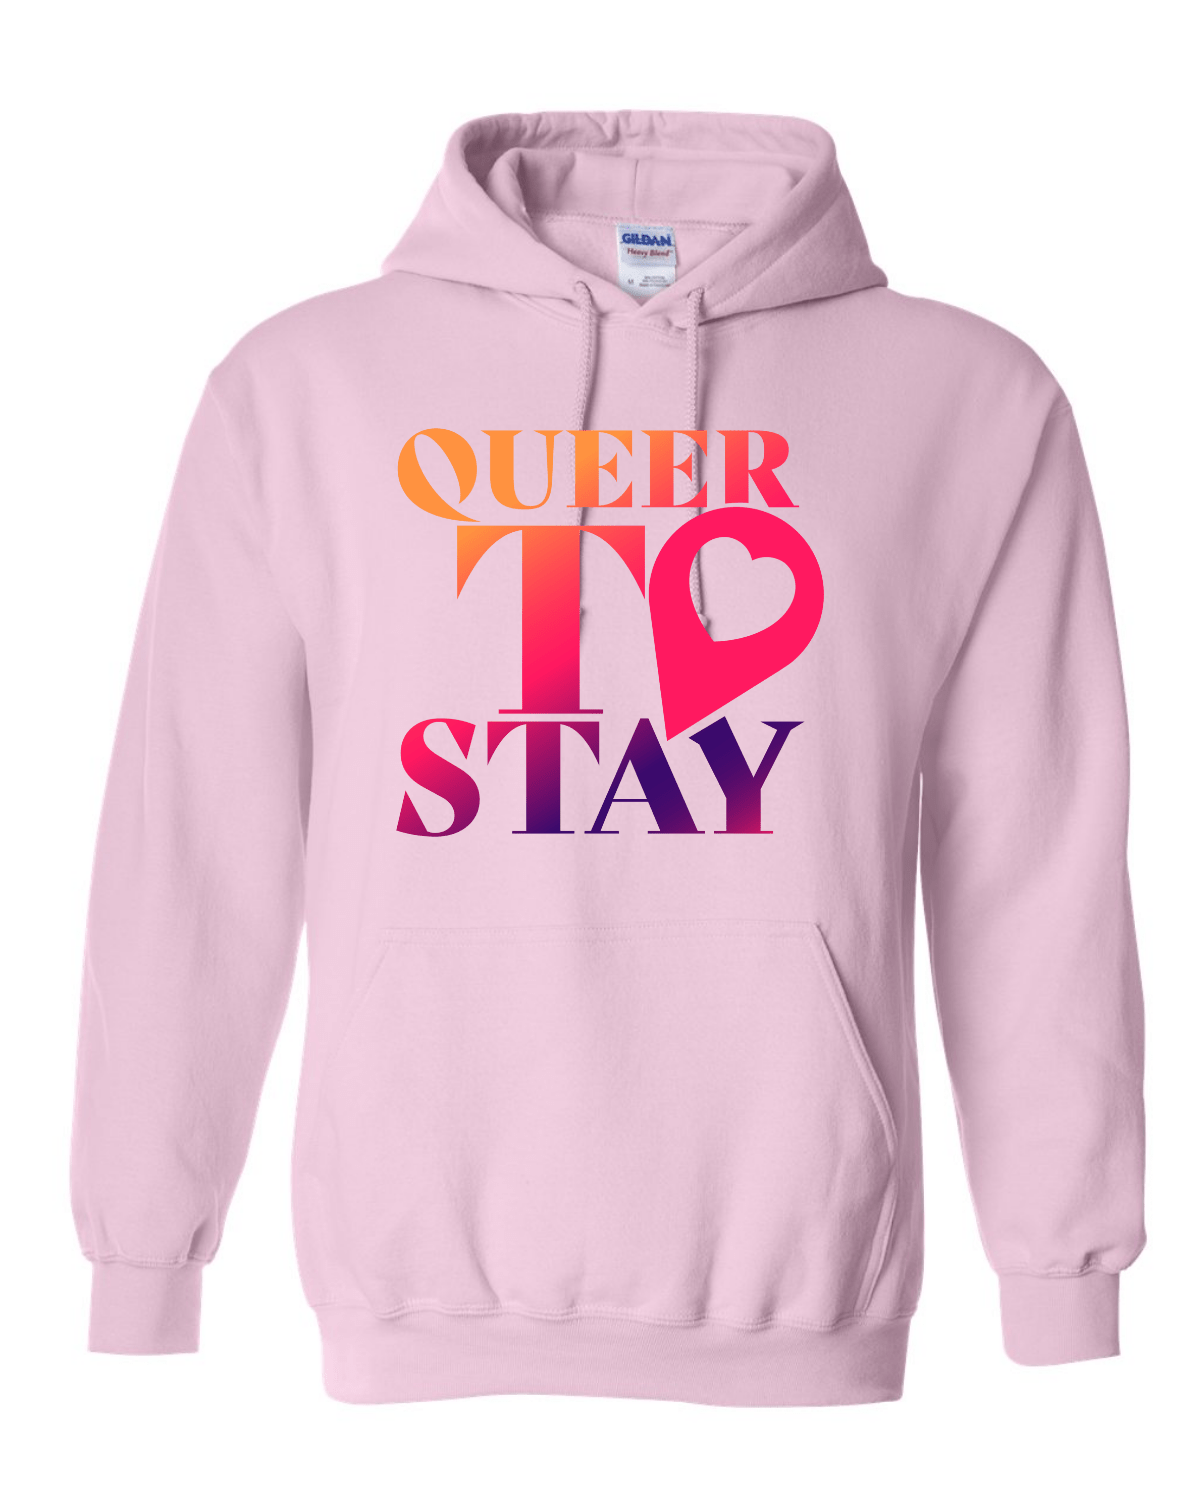 SHOWTIME Queer to Stay Logo Fleece Hooded Sweatshirt - Paramount Shop